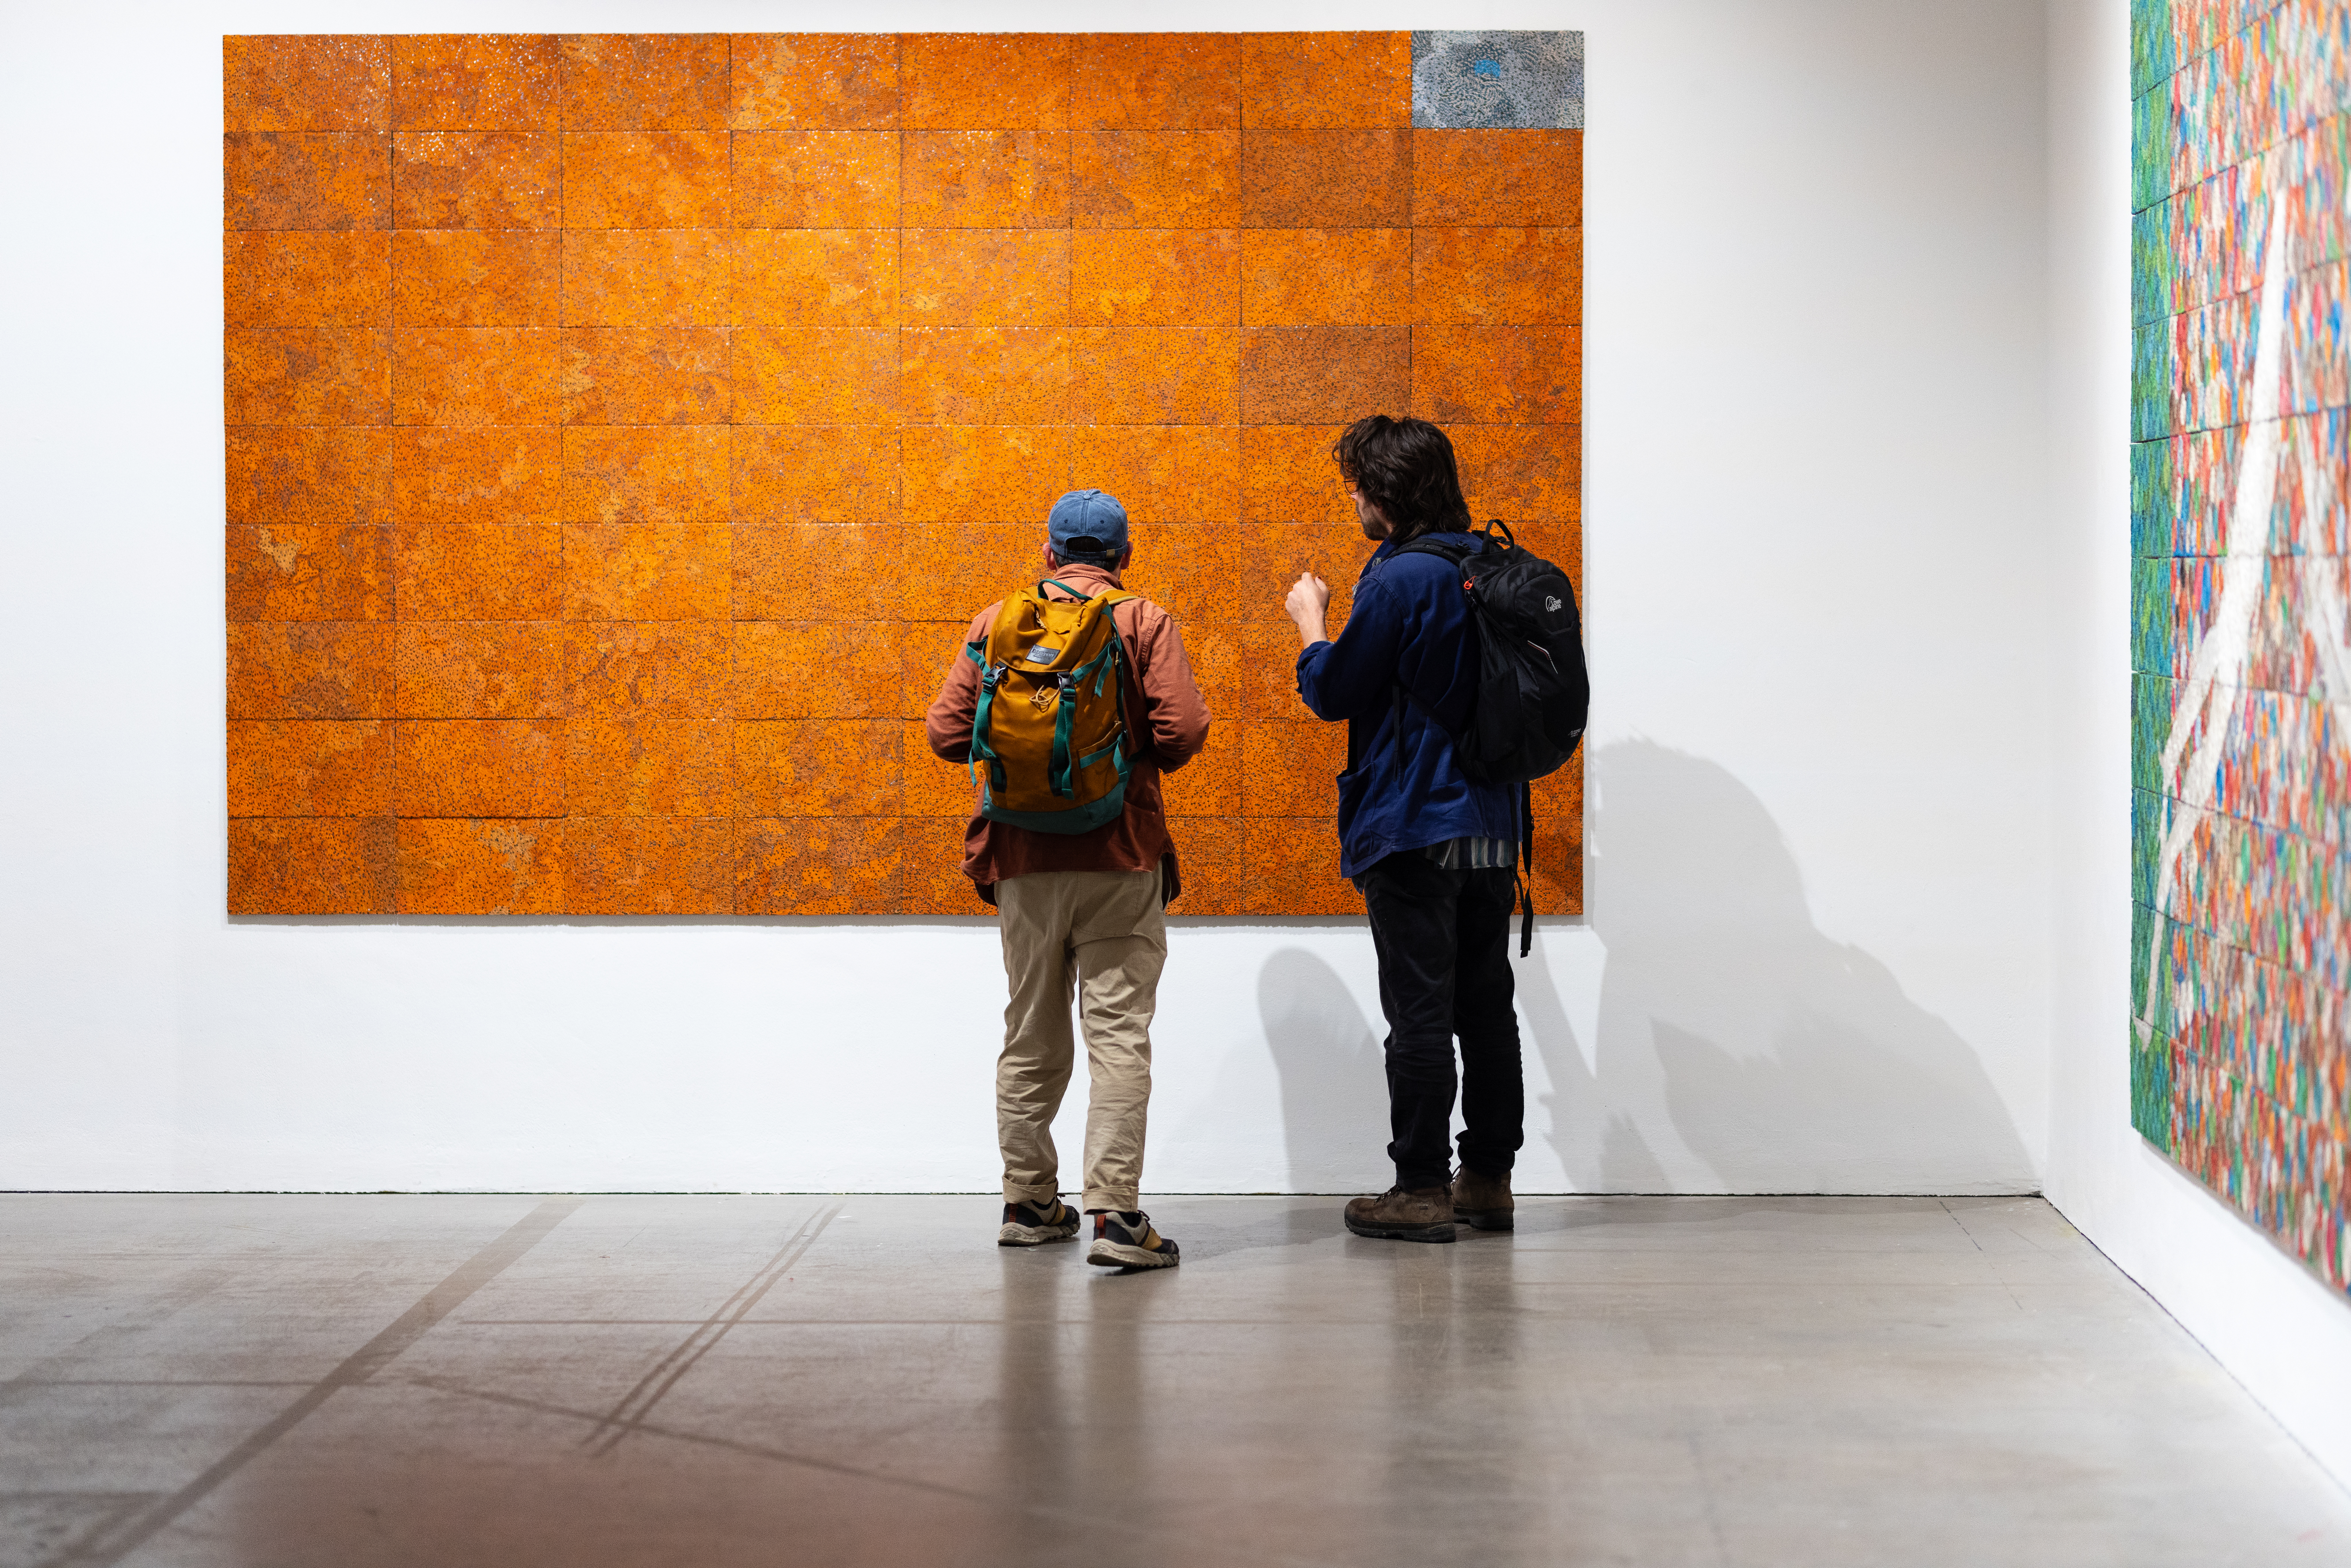 Two people standing in front of a large orange wall piece from the Eregata exhibition